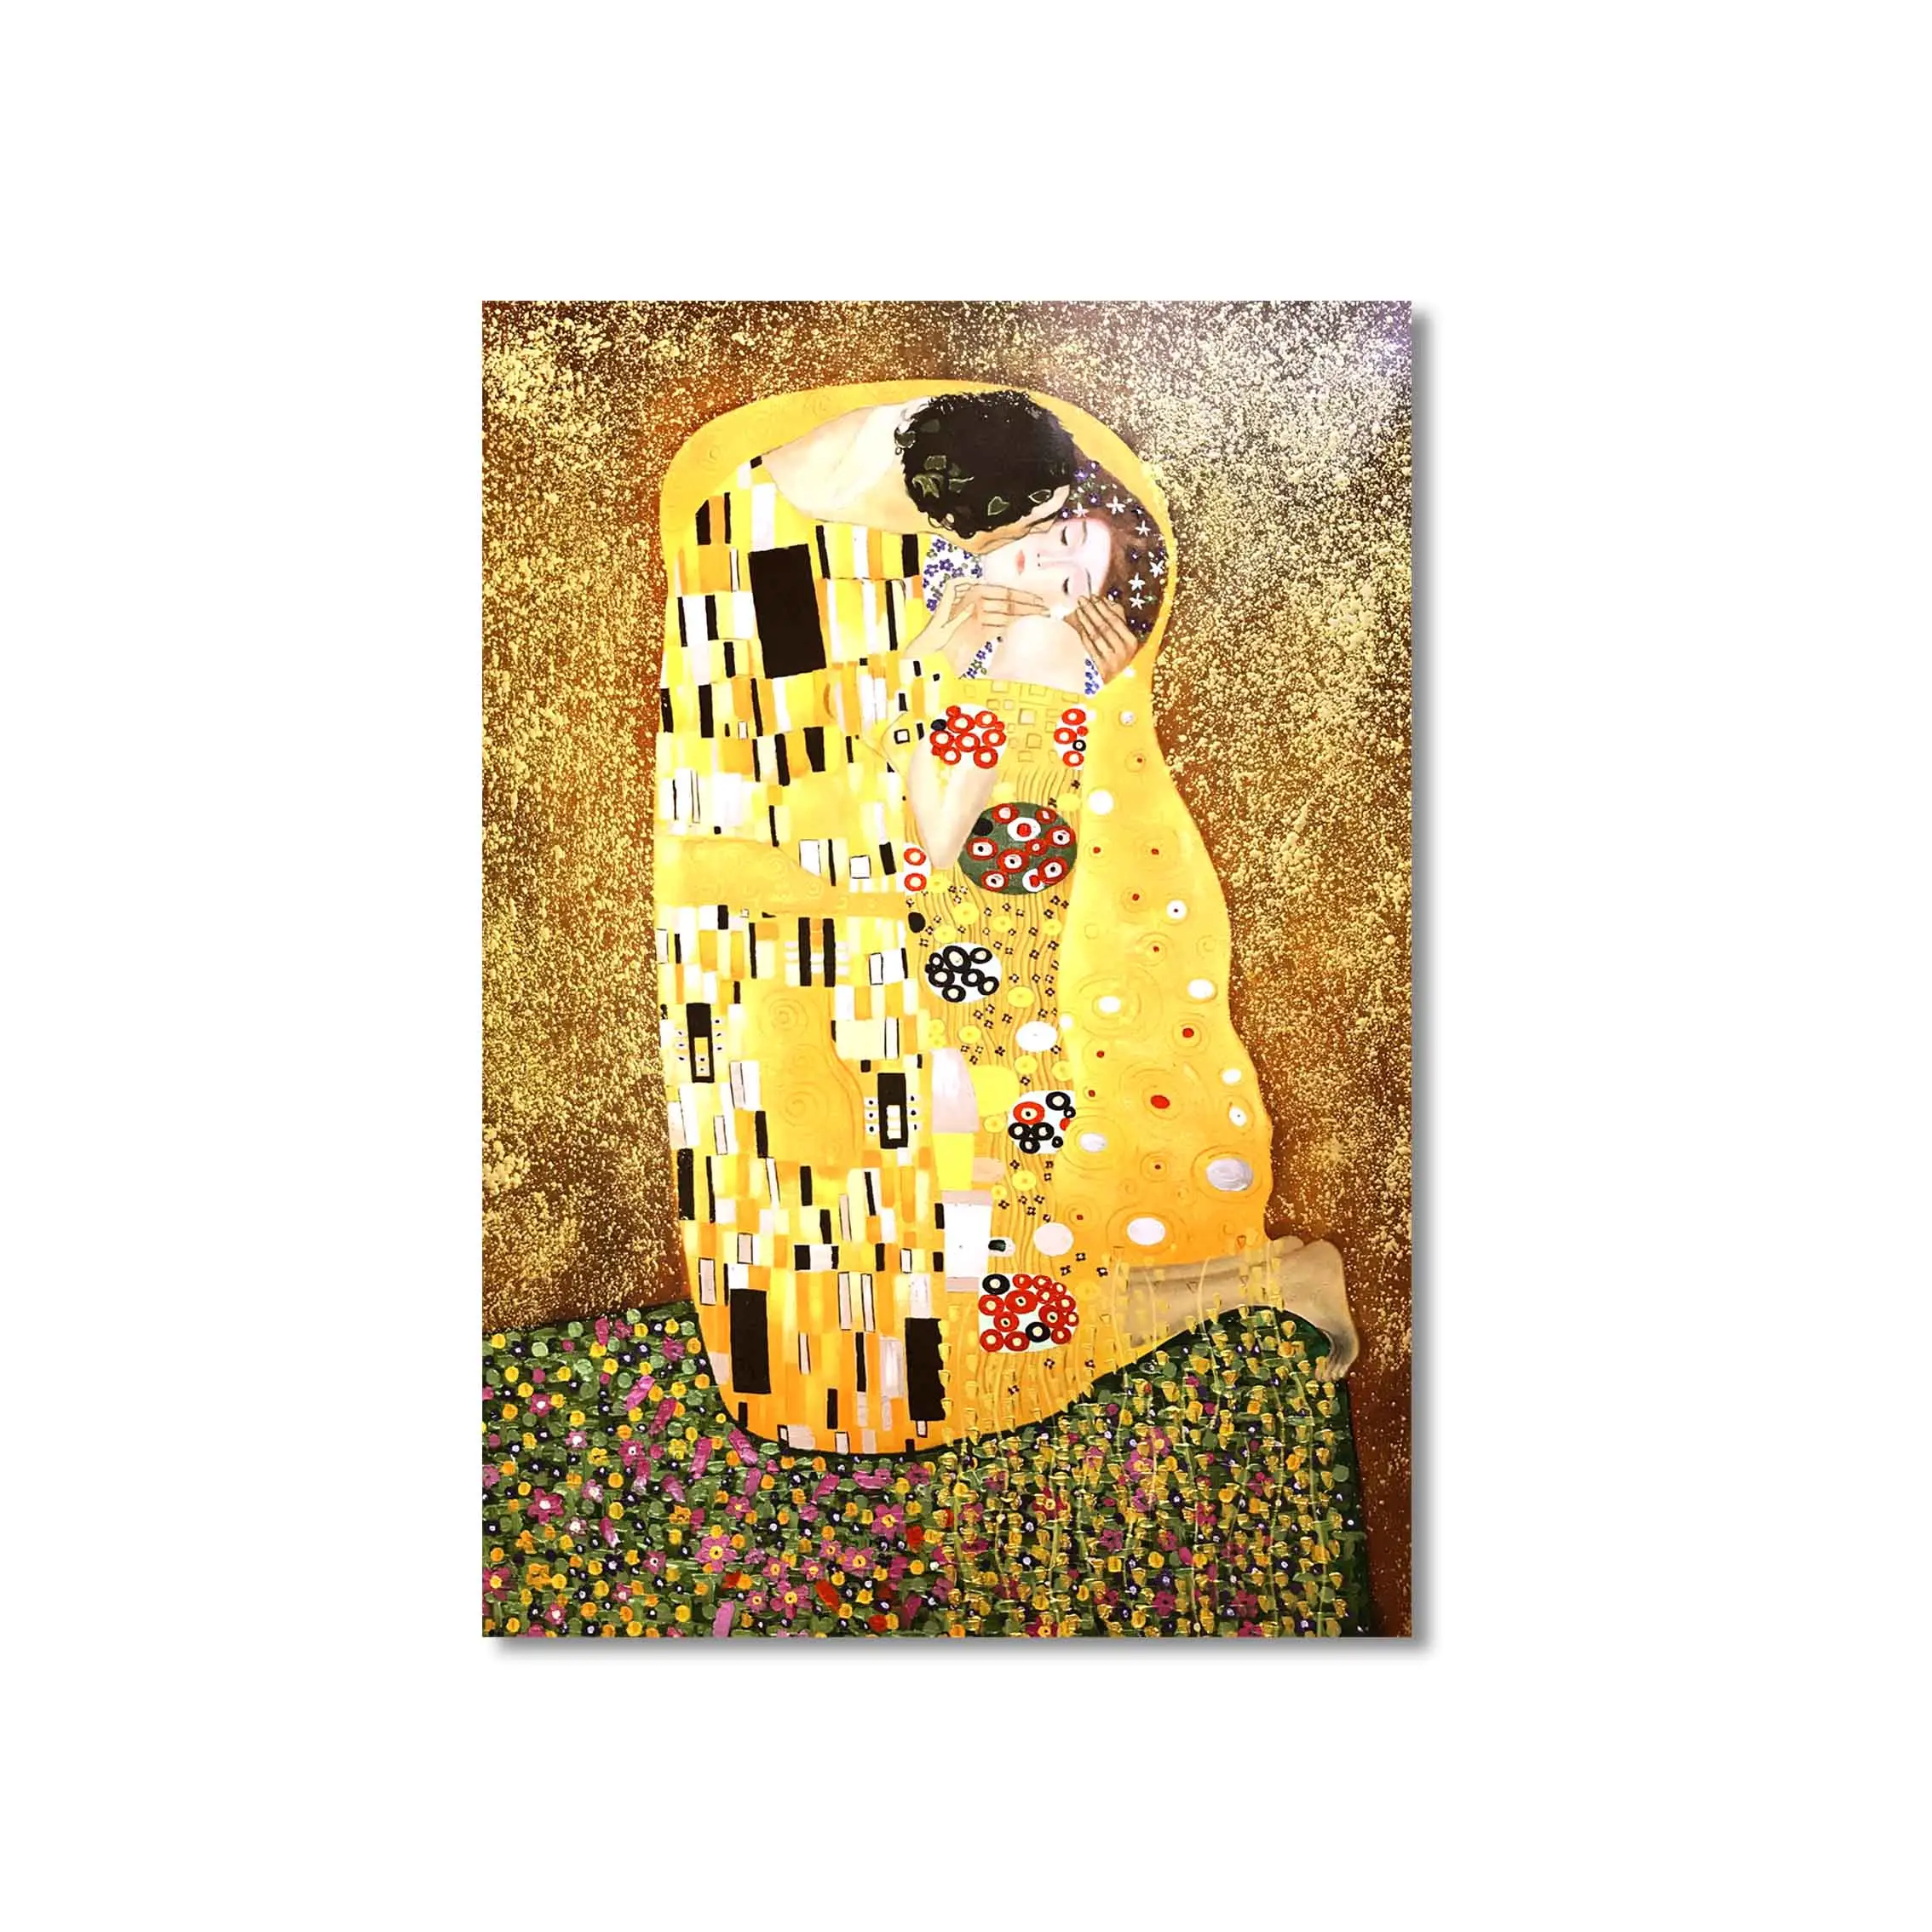 Dafen Handmade Famous Paintings Gustao Klimt The Kiss Home Decoration Reproduction Oil Painting